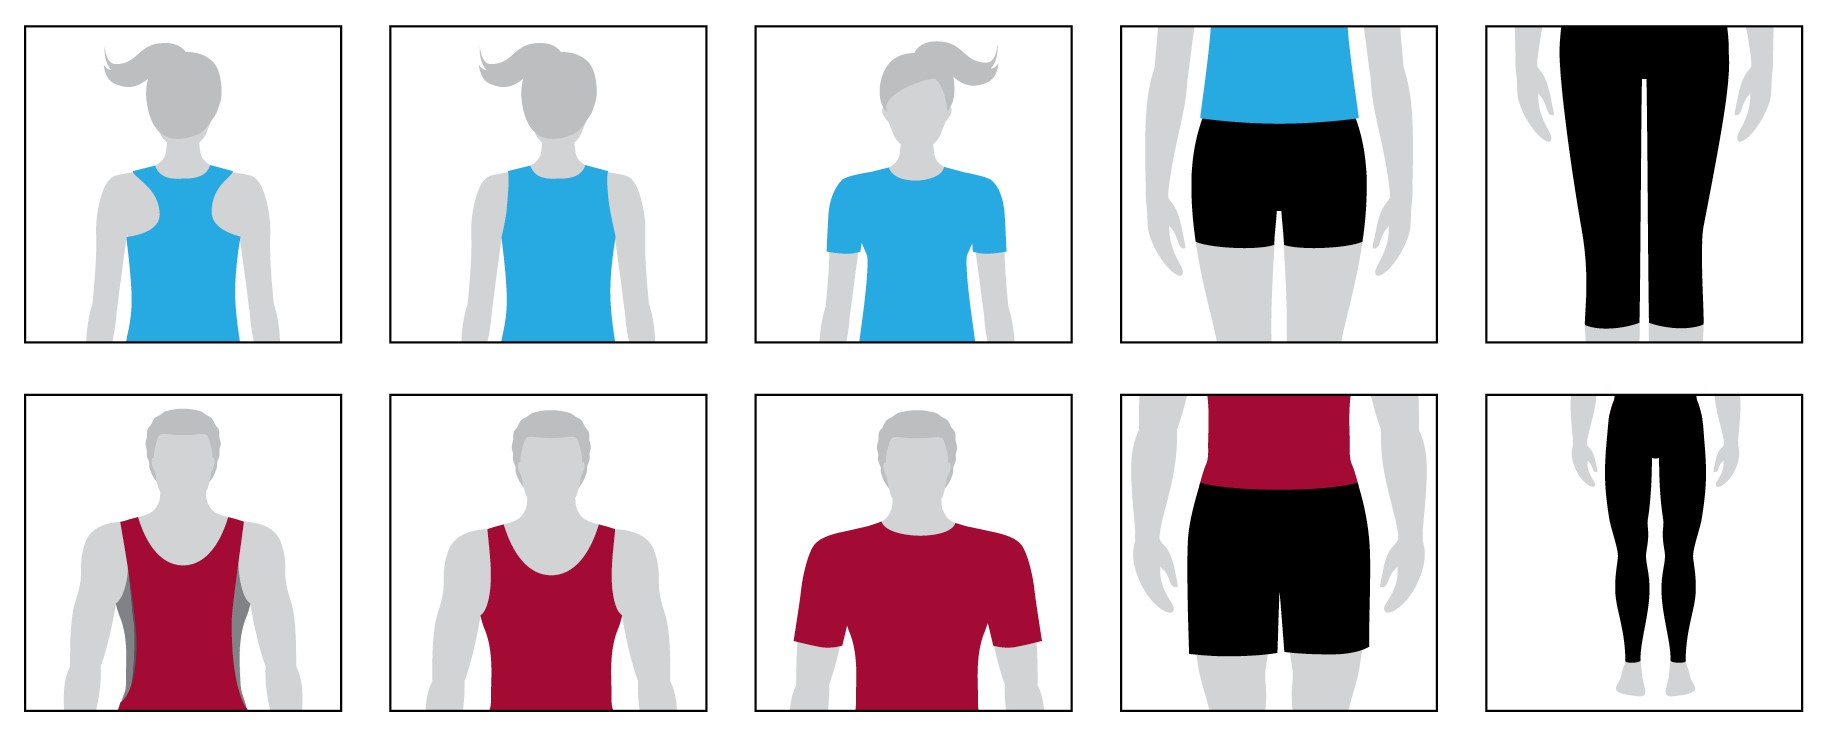 Diagram showing what to wear as noted in the list below the 